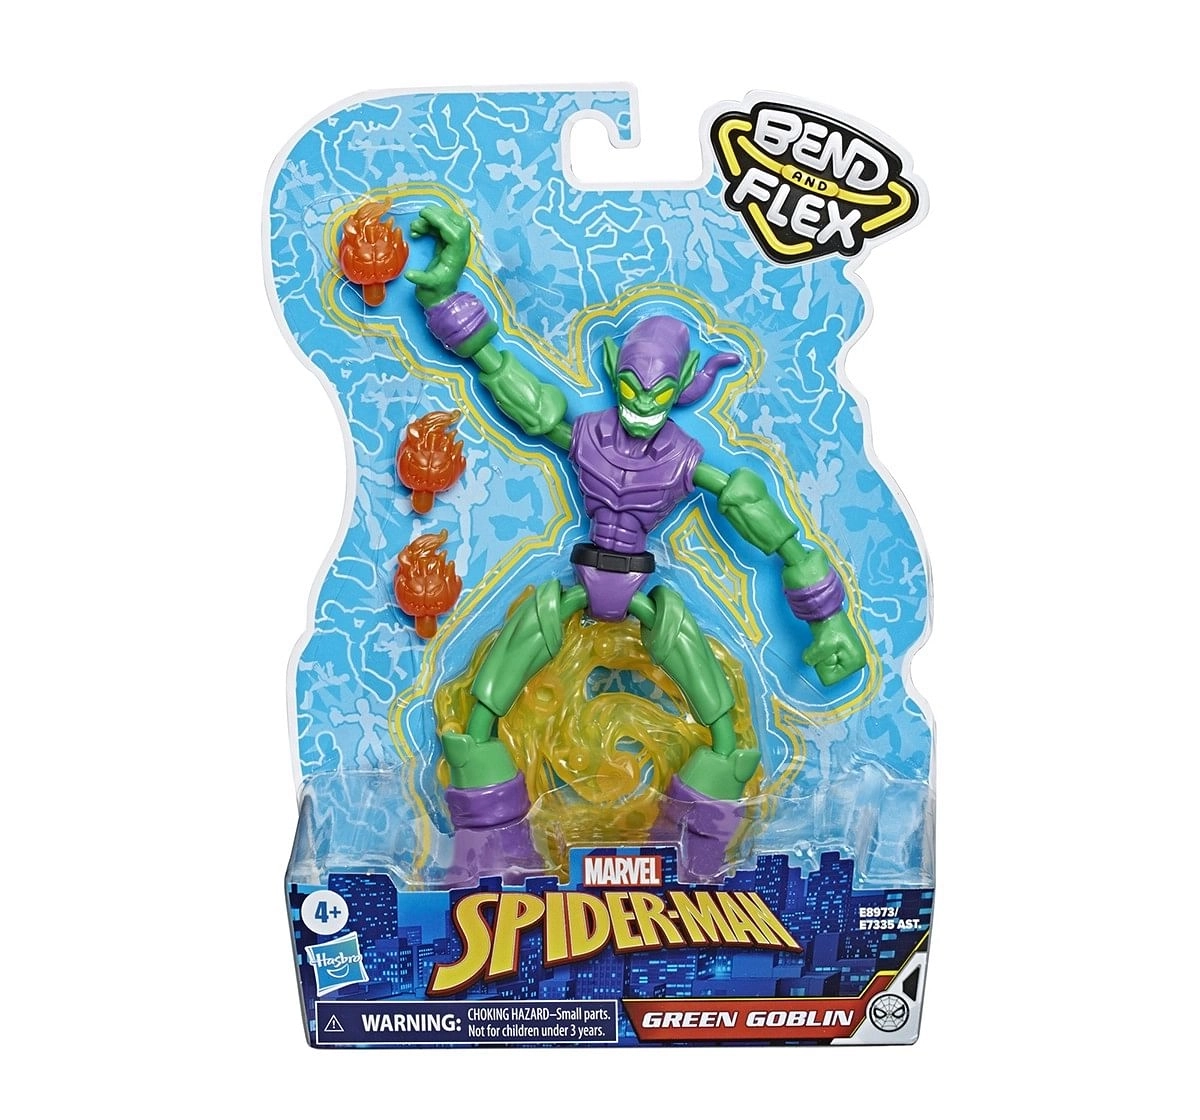 Marvel Spider-Man Bend and Flex Green Goblin Action Figure Toy, 6-Inch Flexible Figure, Includes Blast Accessories, For Kids Ages 4 And Up 